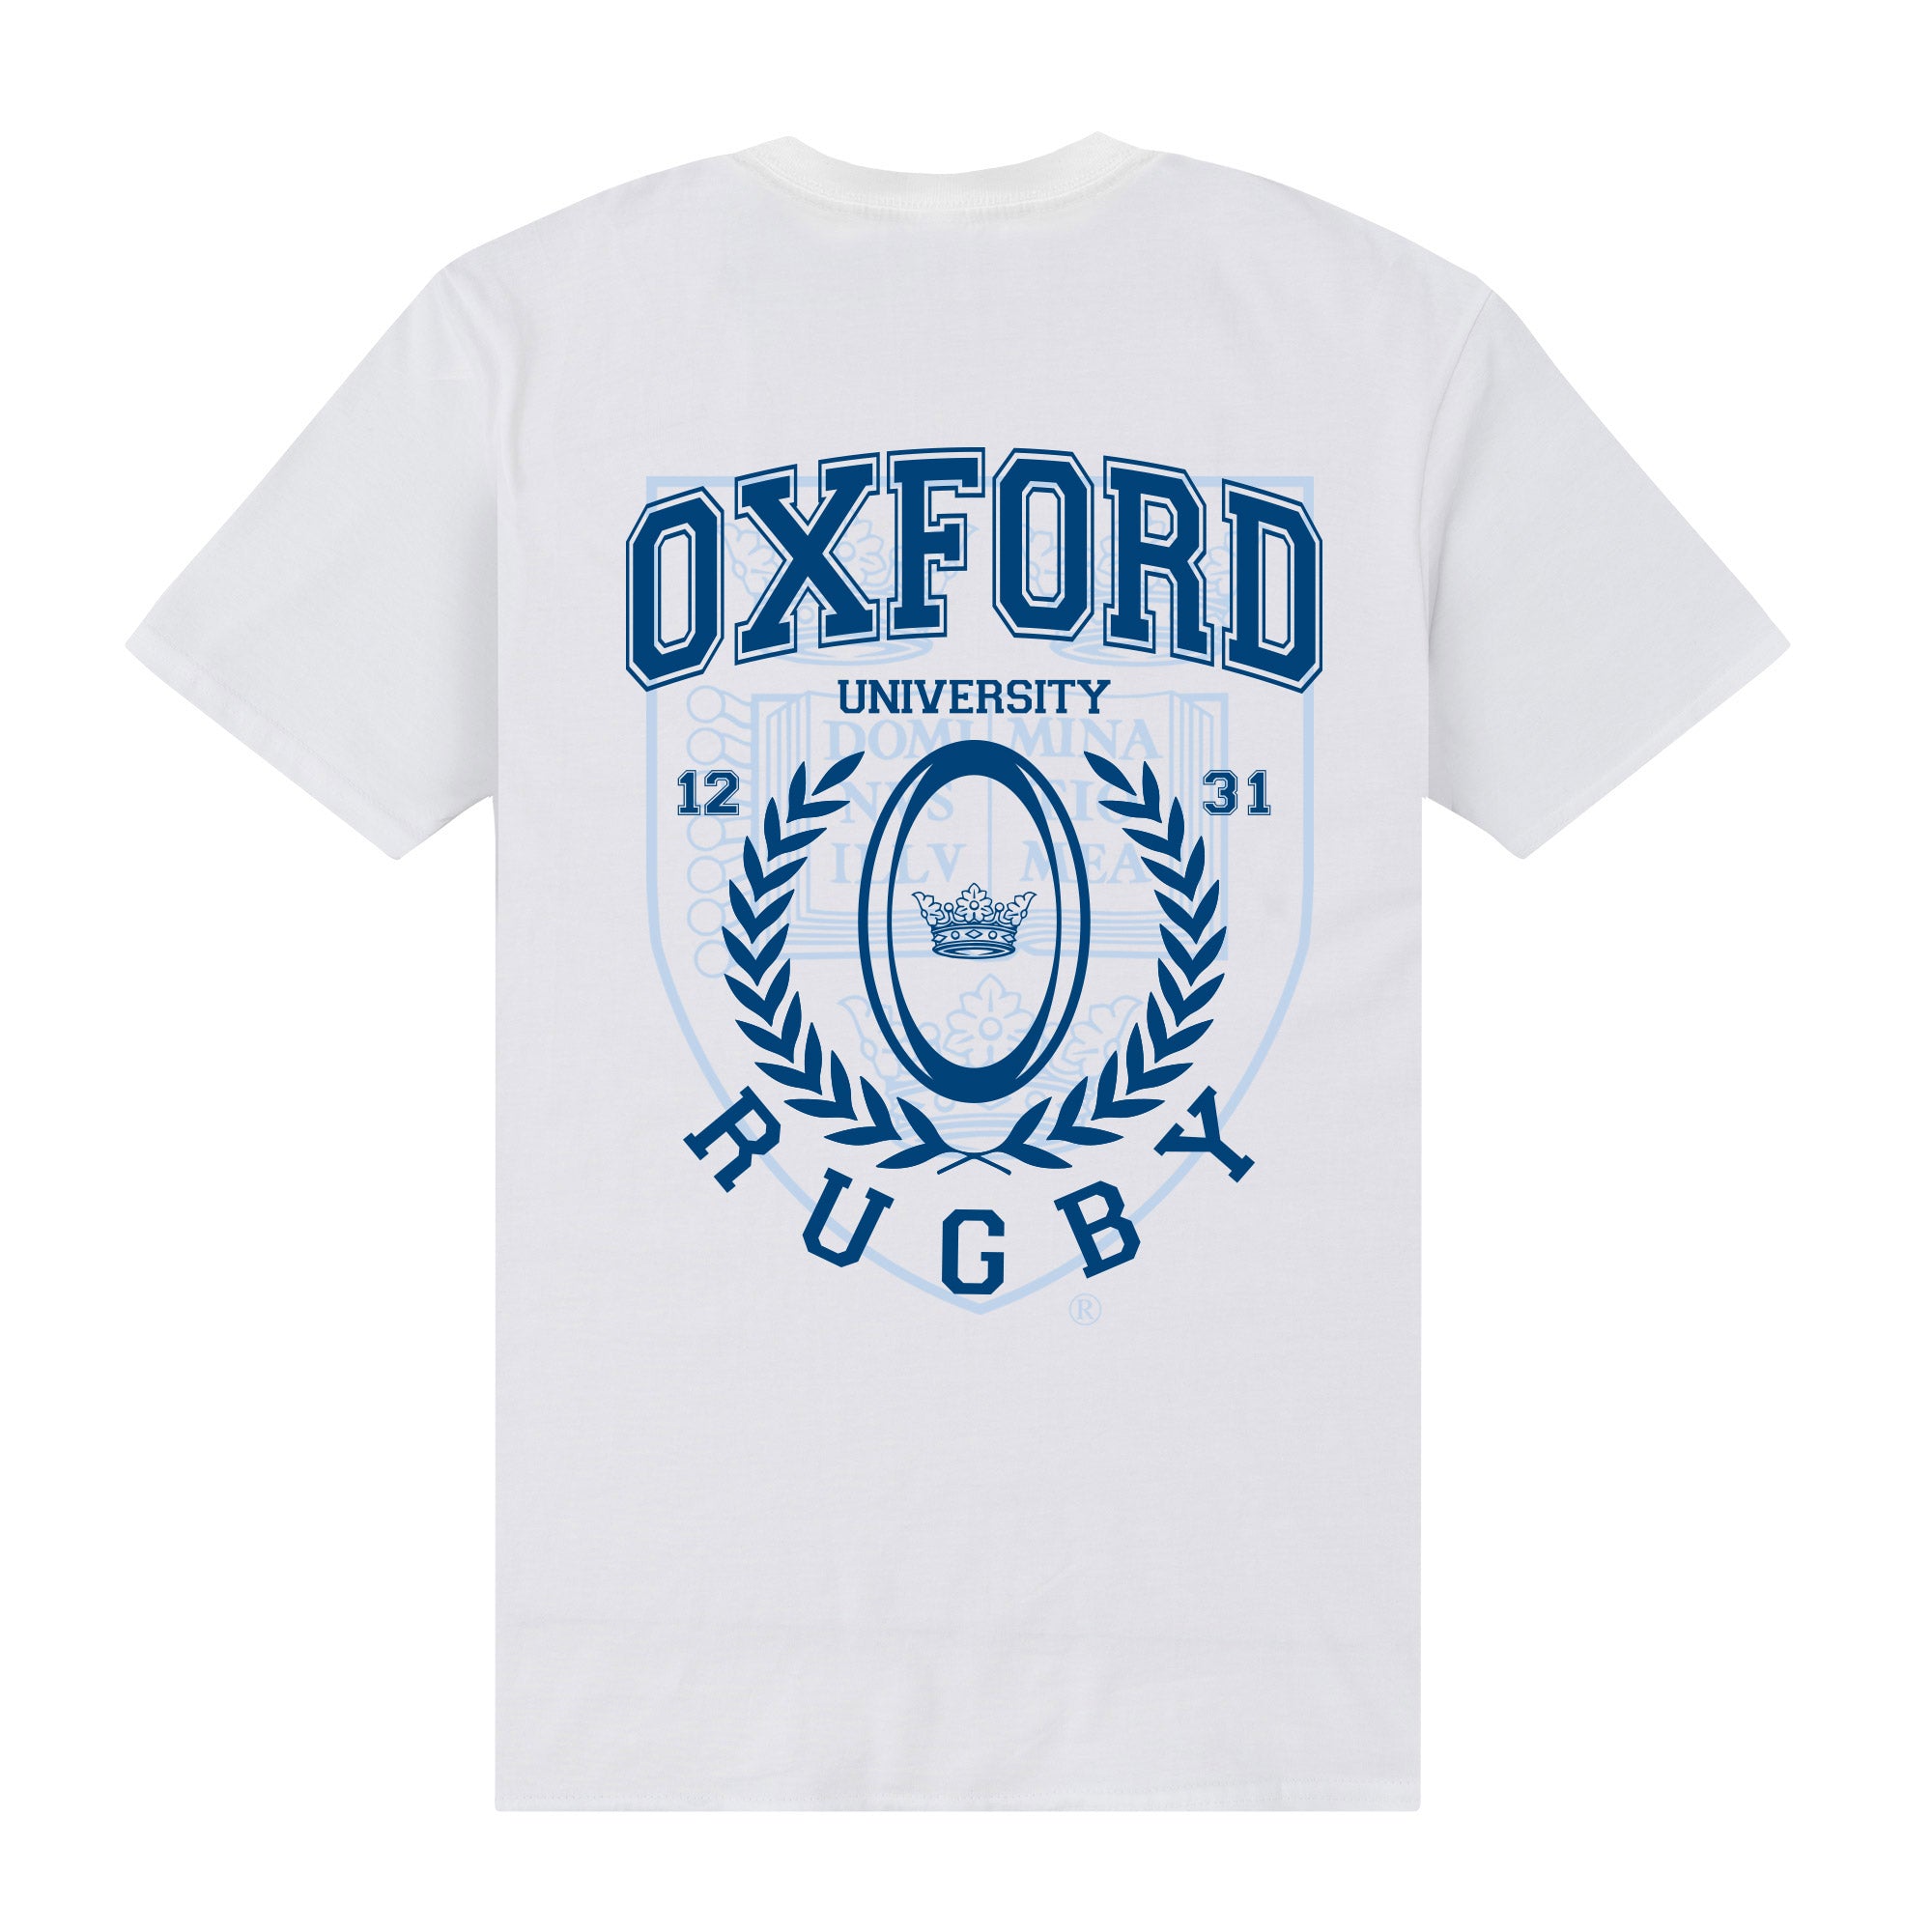 Oxford University Rugby T-Shirt - White